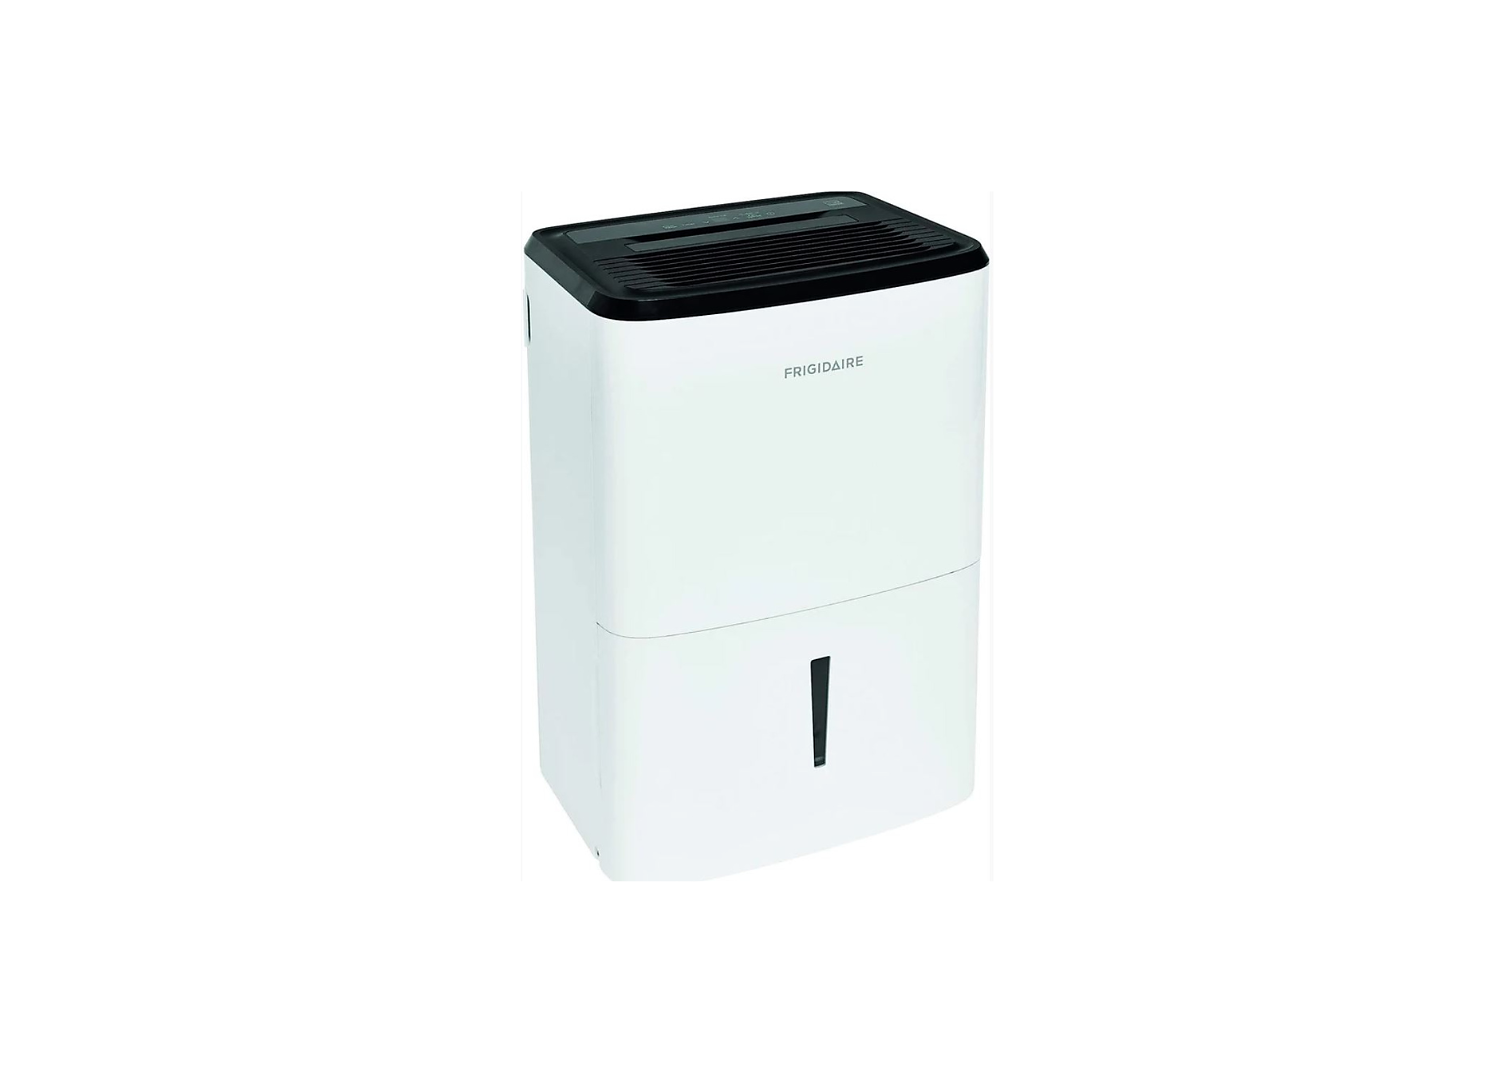 Frigidaire High Humidity 50 Pint Capacity Dehumidifier with Built-in Pump 2000 Sq. Ft.